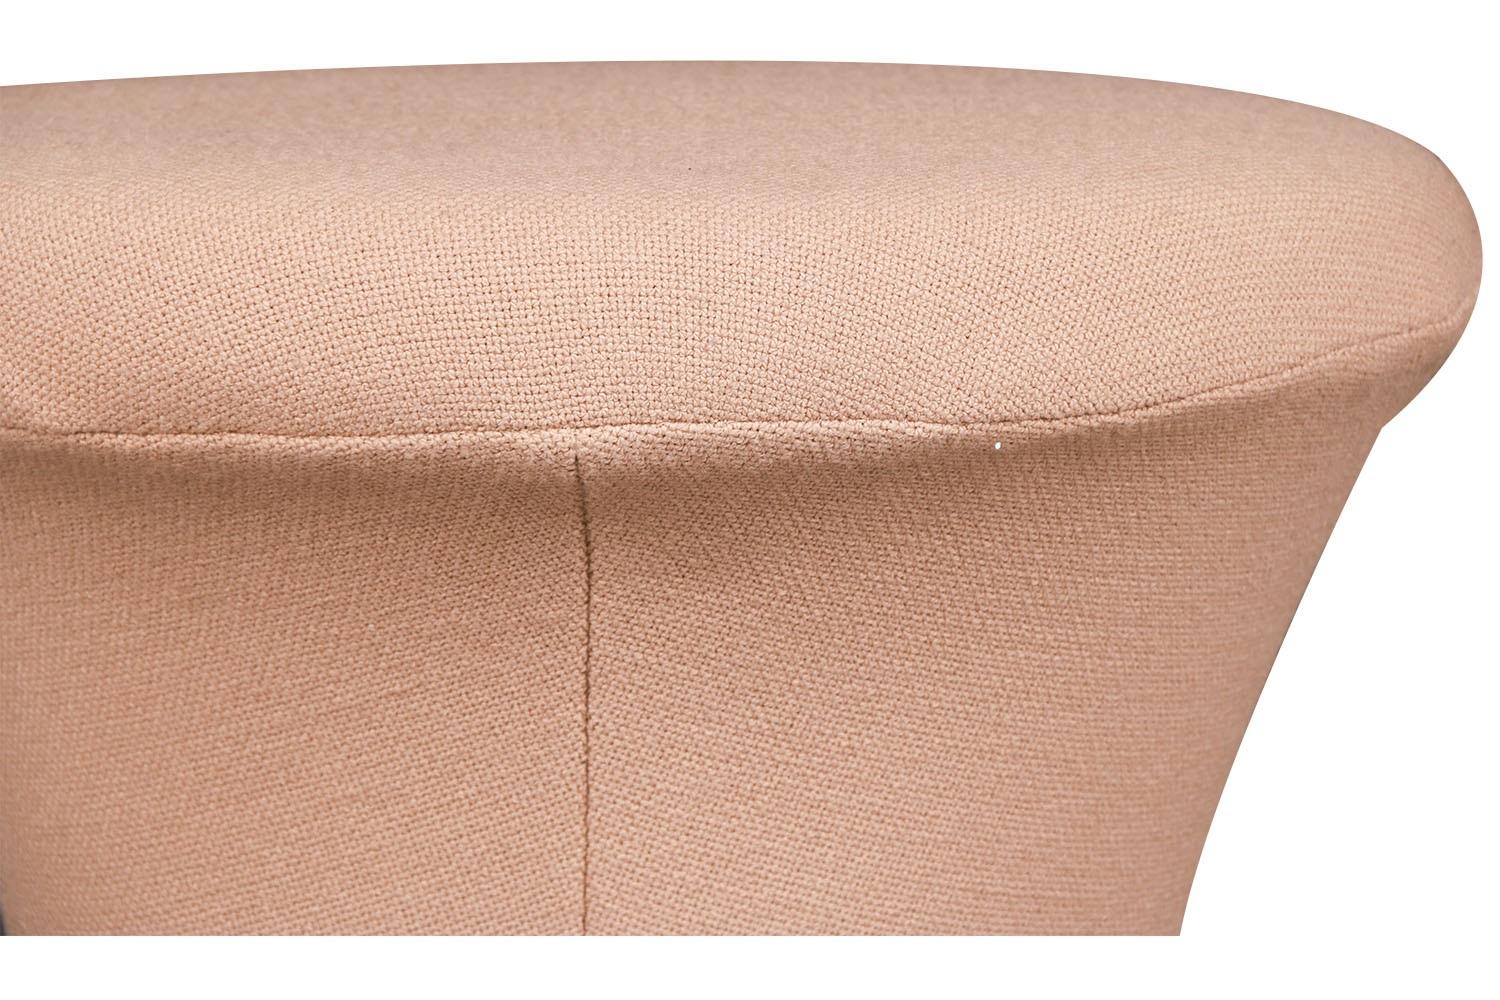 Mid century original, Mushroom pouf stool, or ottoman designed by Pierre Paulin by Artifort. Features original woven cream wool upholstery. Uniquely sculpted in an organic shape adding a dramatic effect. Label on underside (Artifort). Pierre Paulin